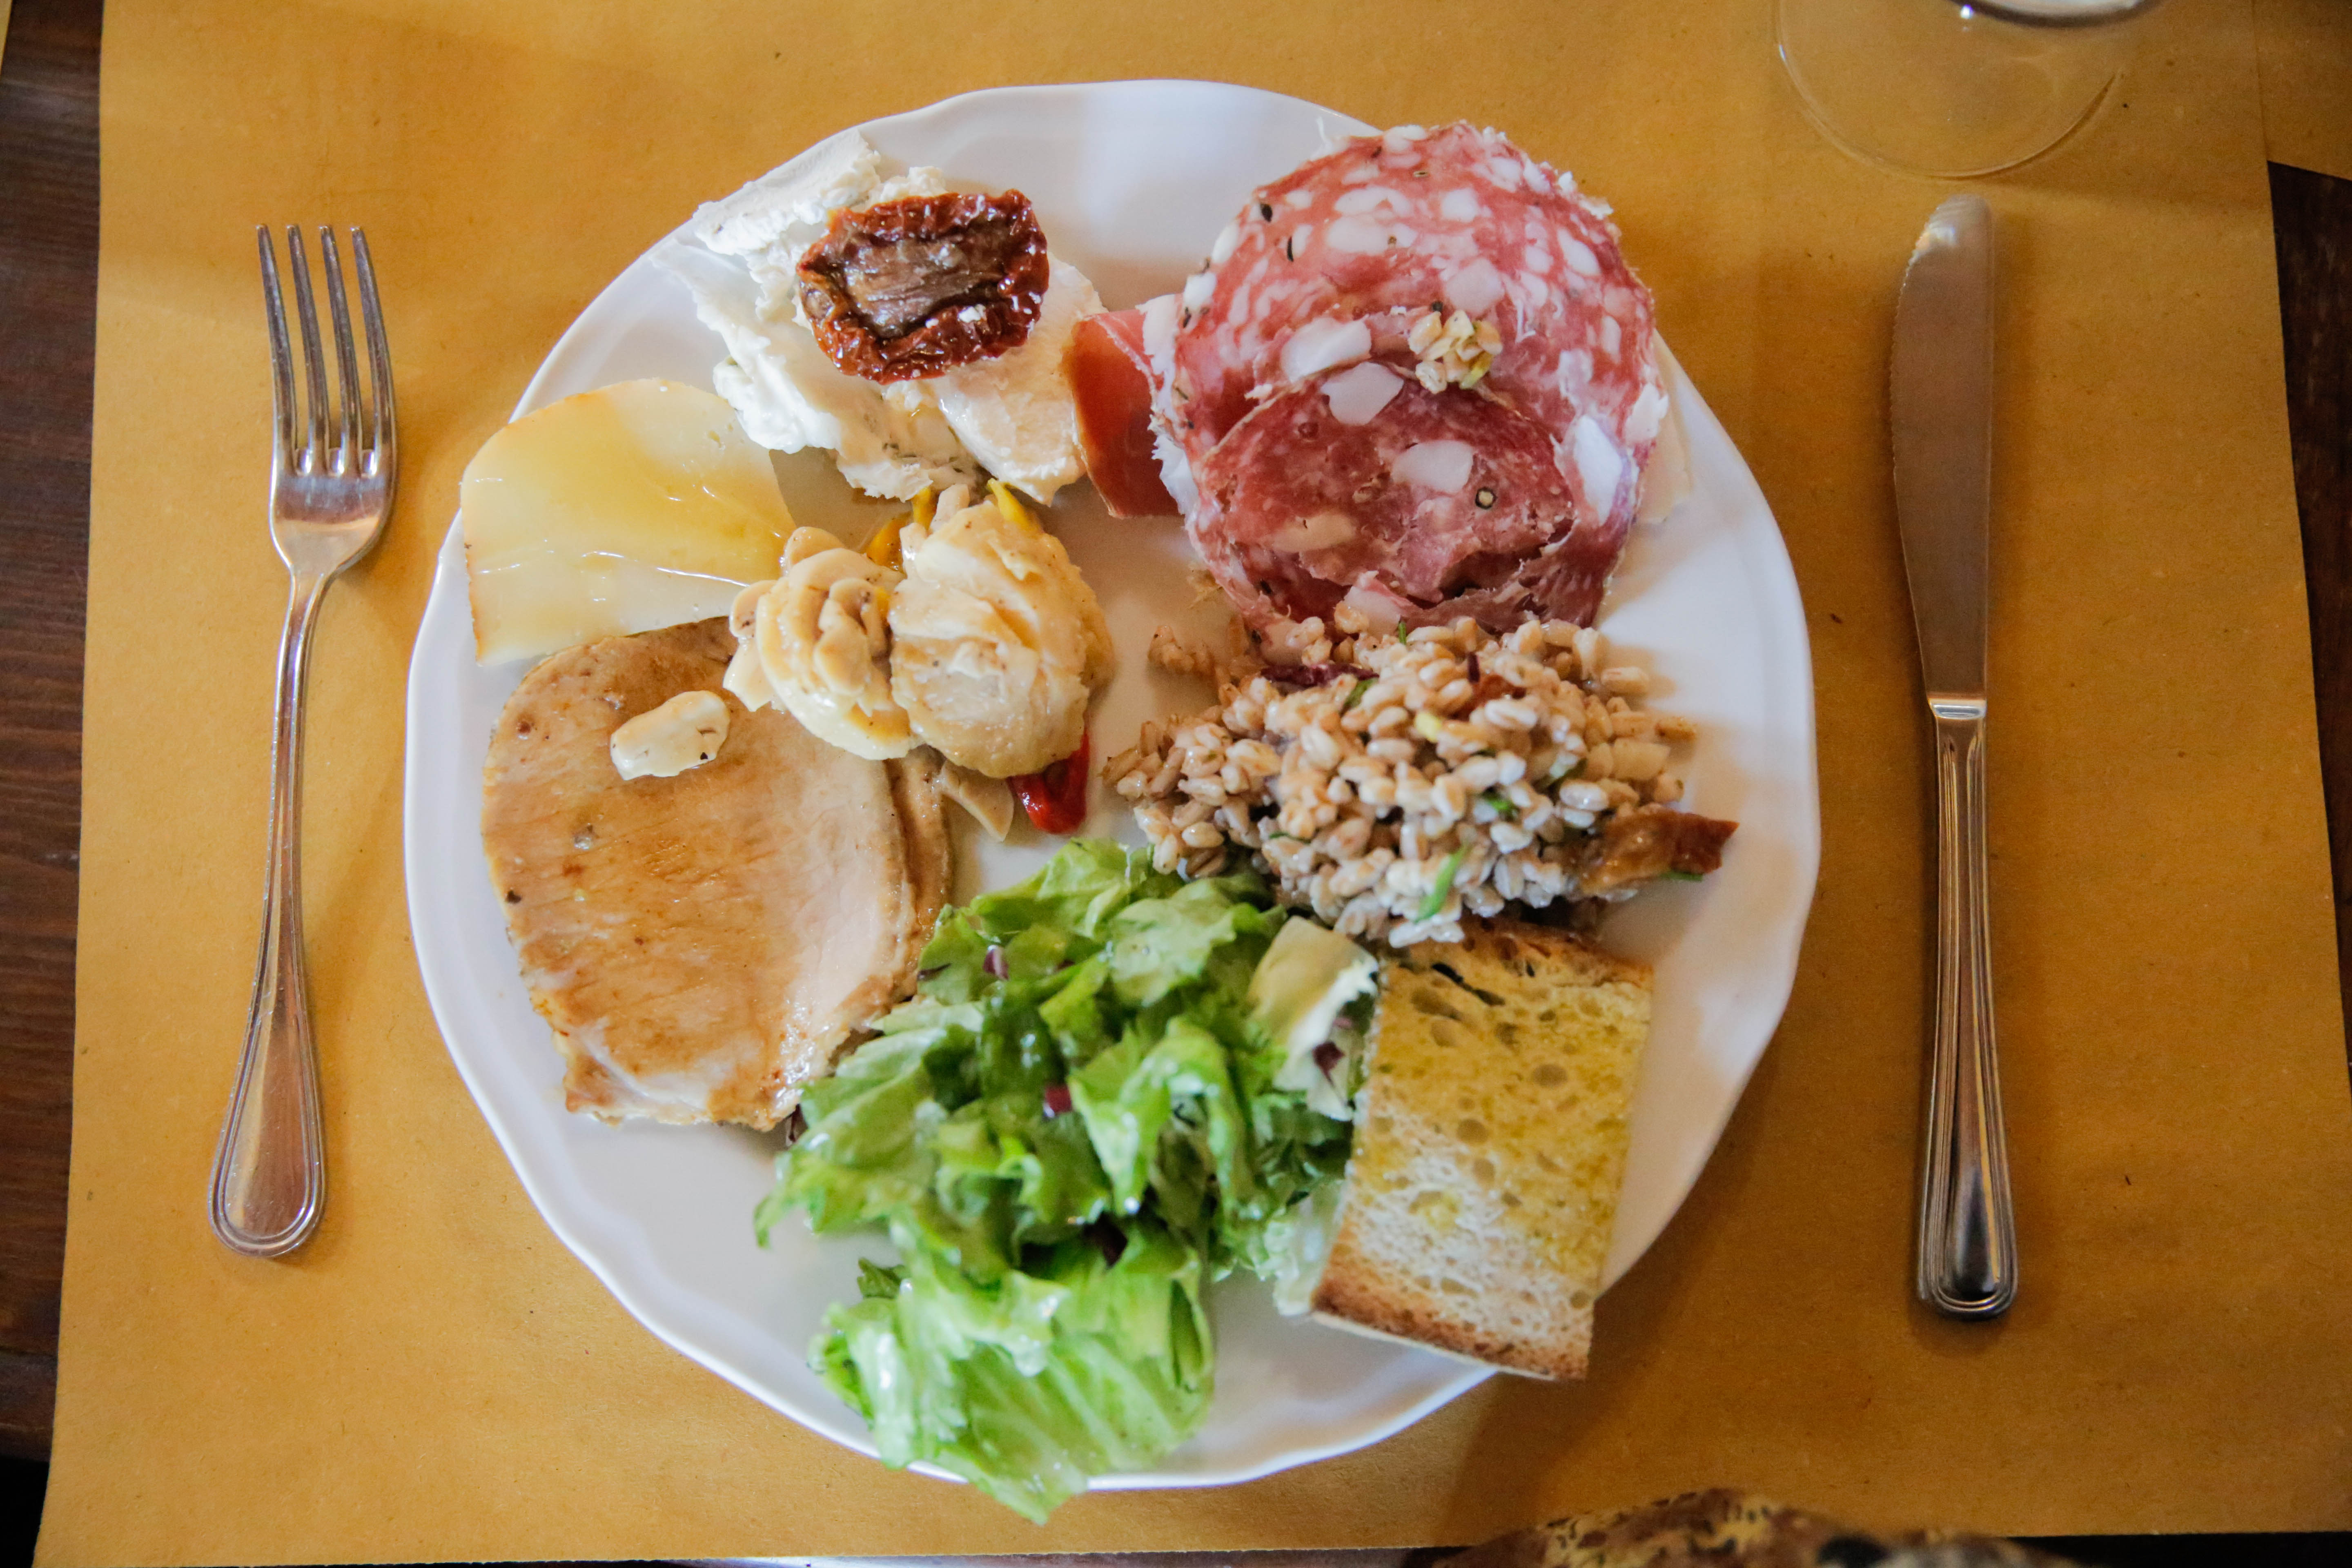 When my tongue hit Italy: a special post for my Italian feast